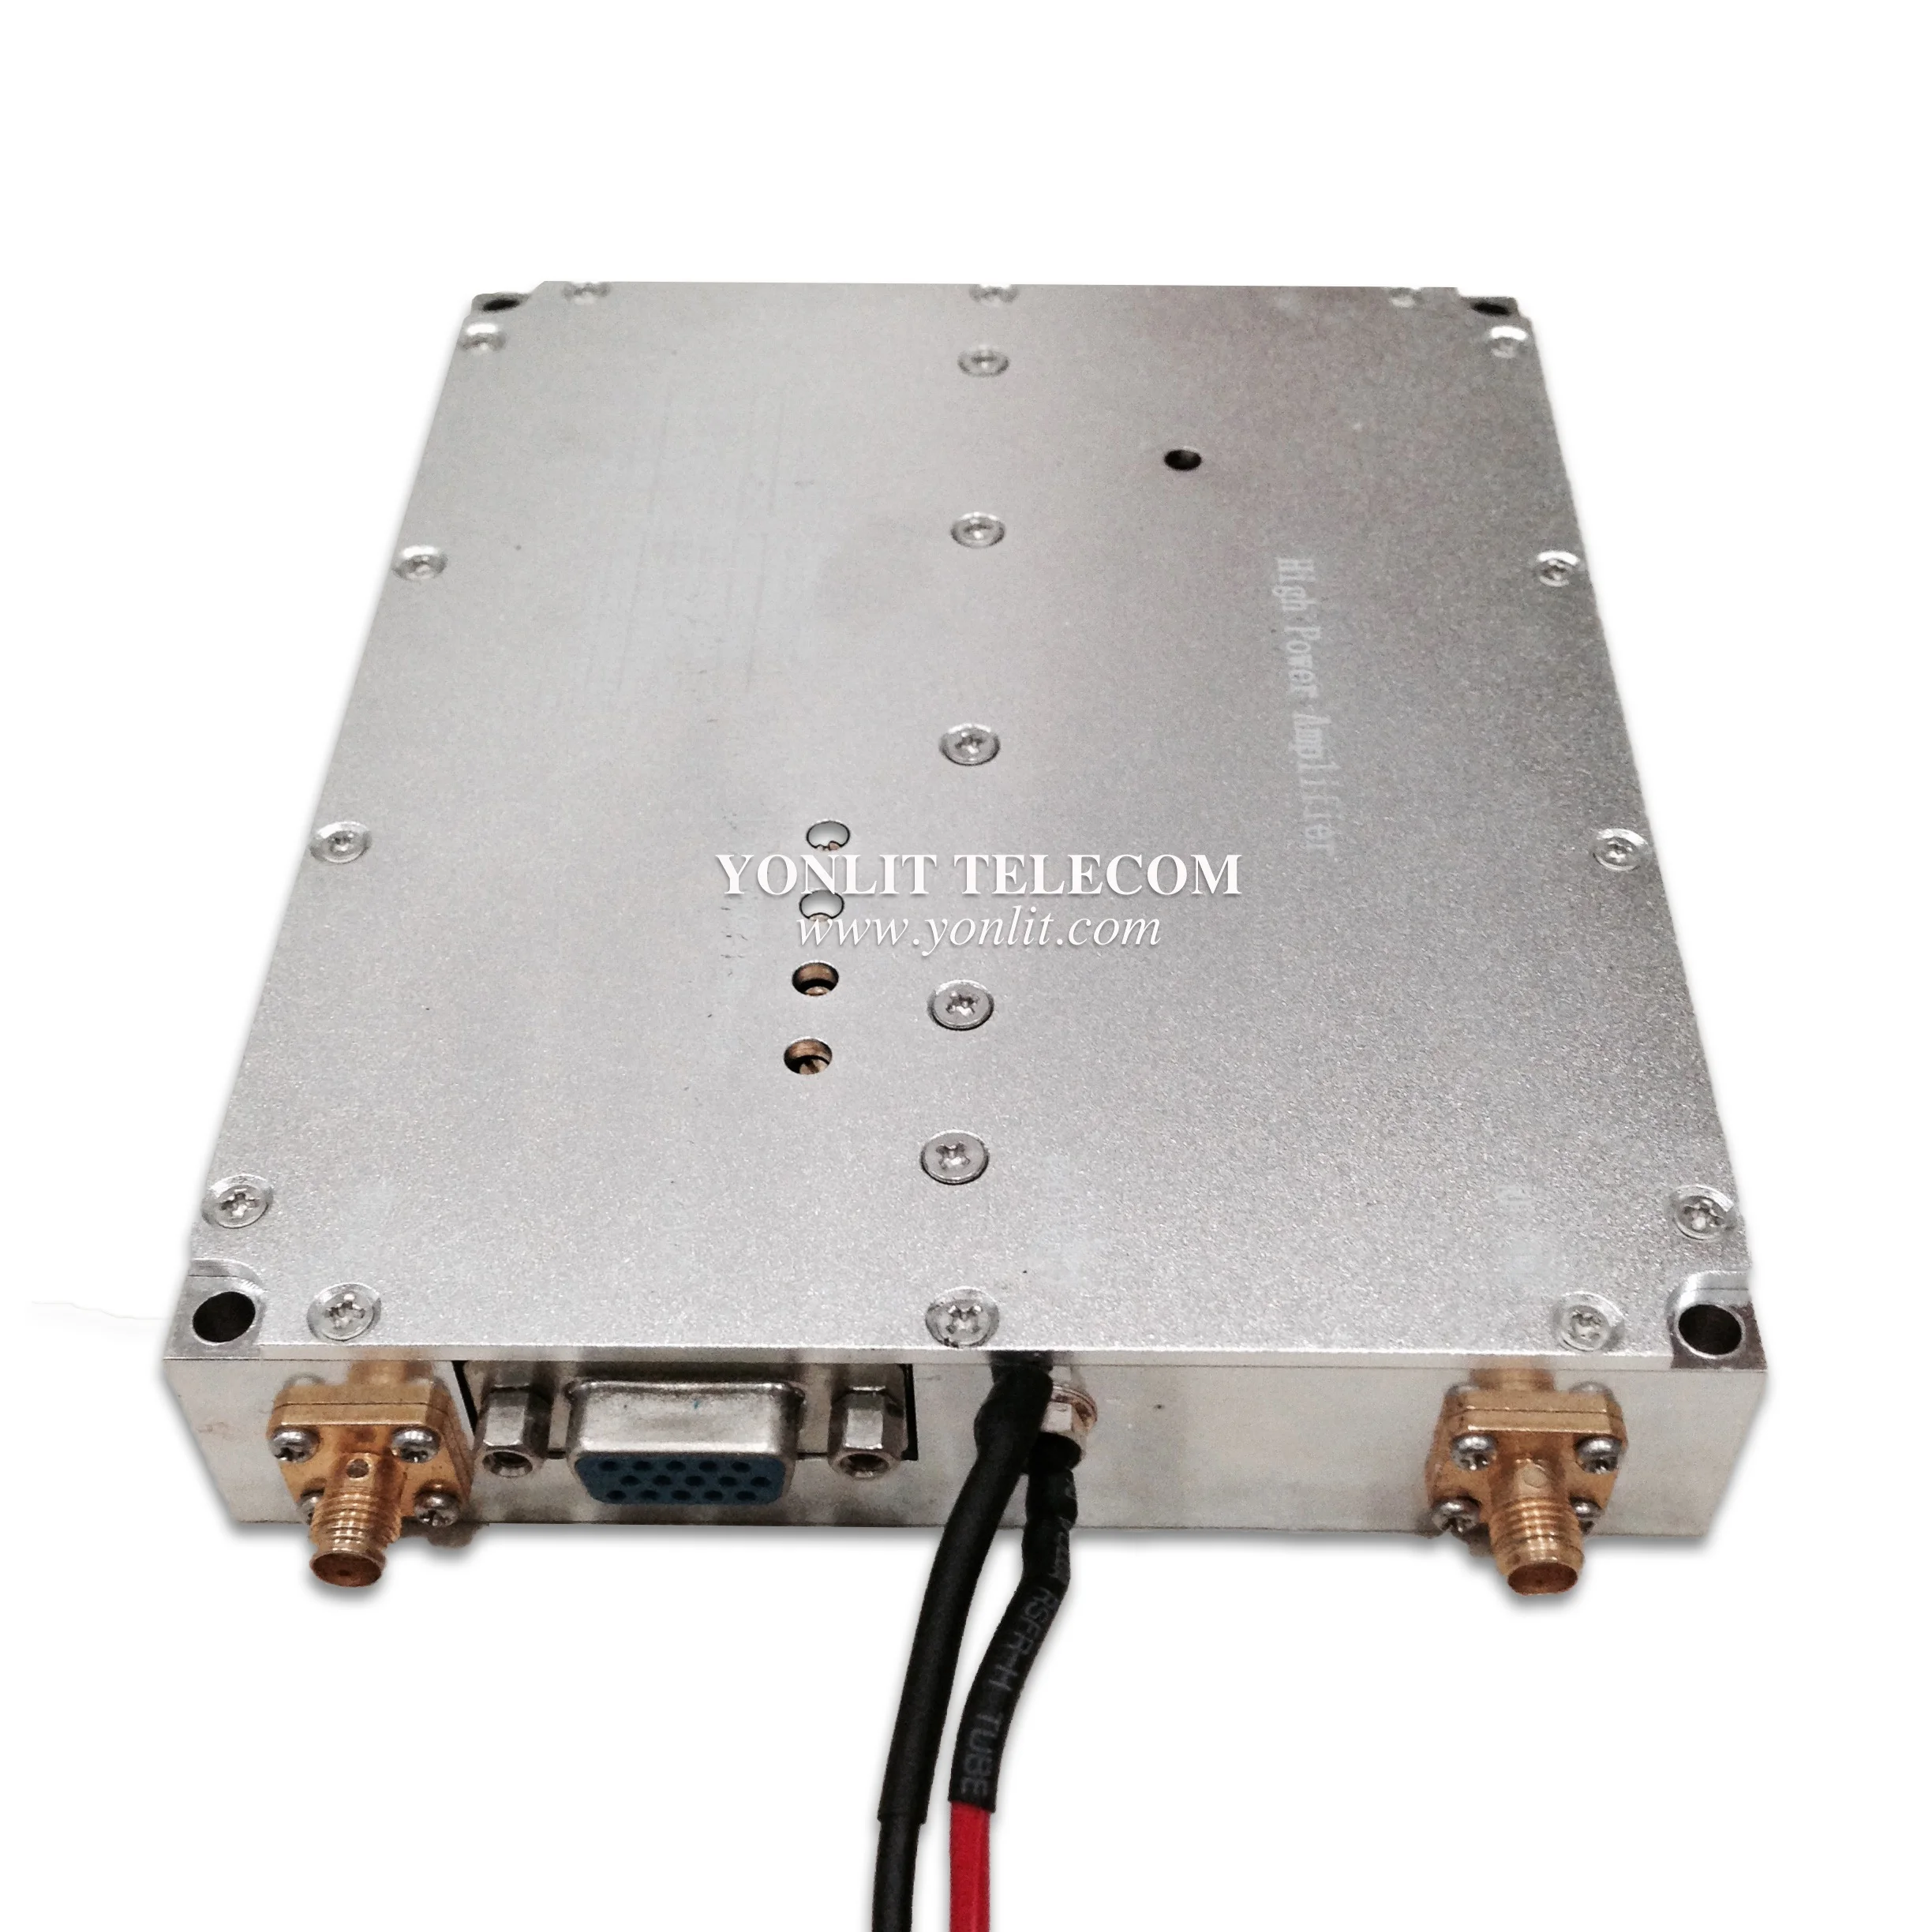 

UHF 380-470MHz Police Repeater Dronebuster Solid State Power Amplifier